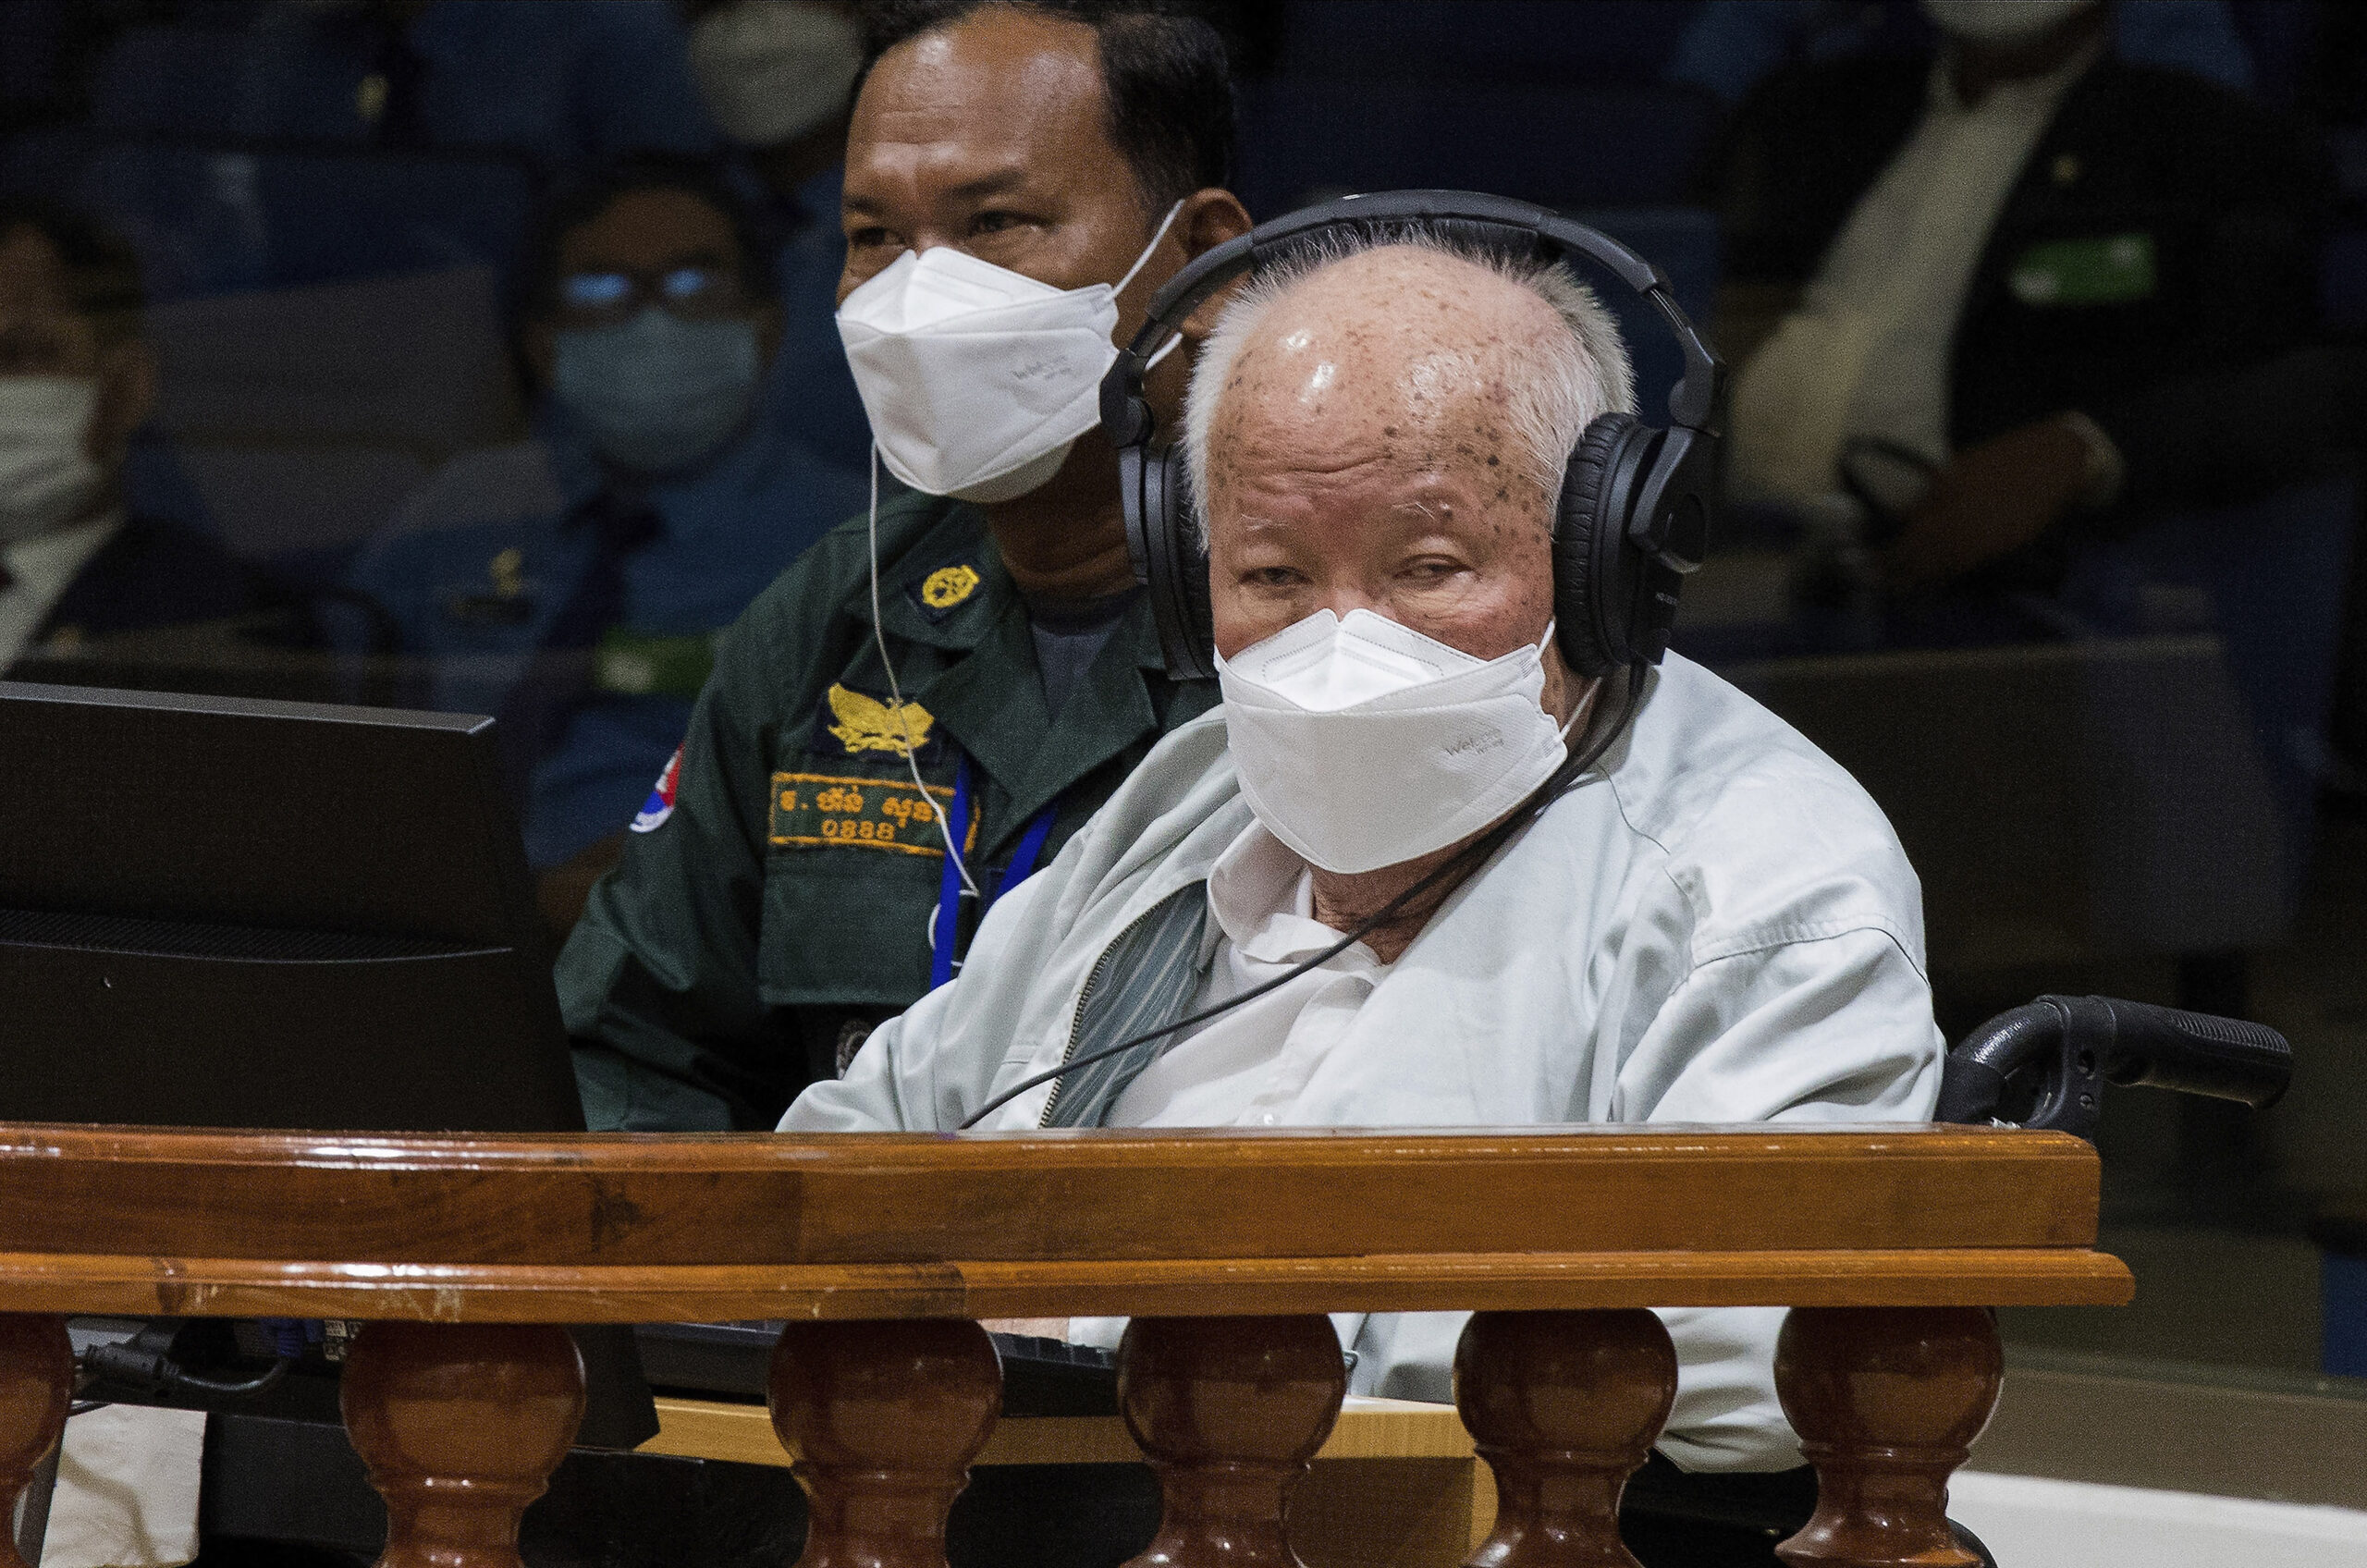 In this photo released by the Extraordinary Chambers in the Courts of Cambodia, Khieu Samphan, right, the former head of state for the Khmer Rouge, sits in a courtroom during a hearing at the U.N.-backed war crimes tribunal in Phnom Penh, Cambodia, Thursday, Sept. 22, 2022. The international court convened in Cambodia to judge the brutalities of the Khmer Rouge regime that caused the deaths of an estimated 1.7 million people in the 1970s ends its work Thursday after spending $337 million and 16 years to convict just three men of crimes. (Nhet Sok Heng/Extraordinary Chambers in the Courts of Cambodia via AP)